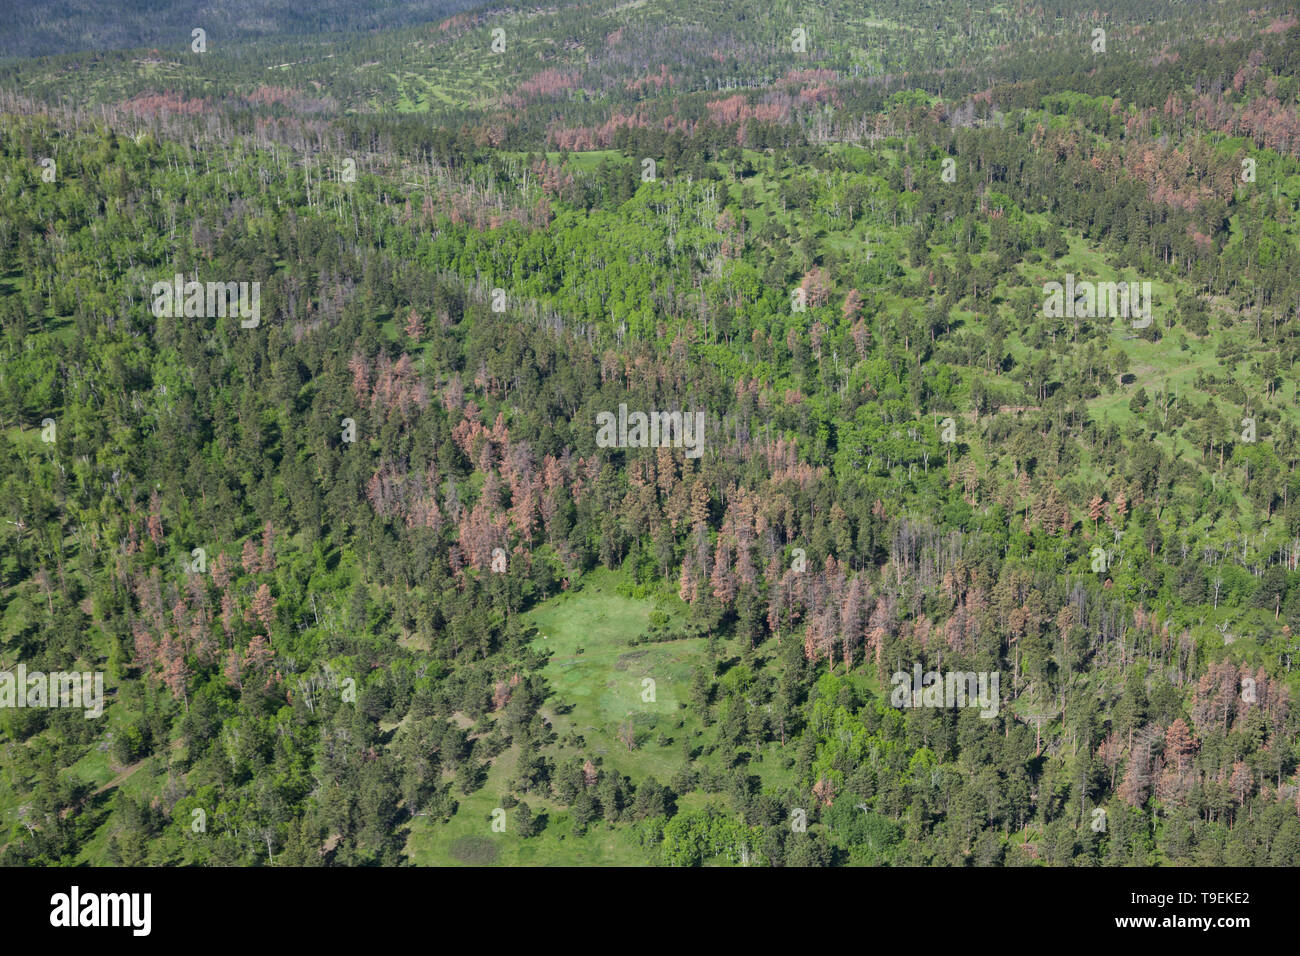 An aerial view of the Black Hills area of South Dakota showing a hillside area with groups of dead and dying trees due to a pine beetle infestation. Stock Photo